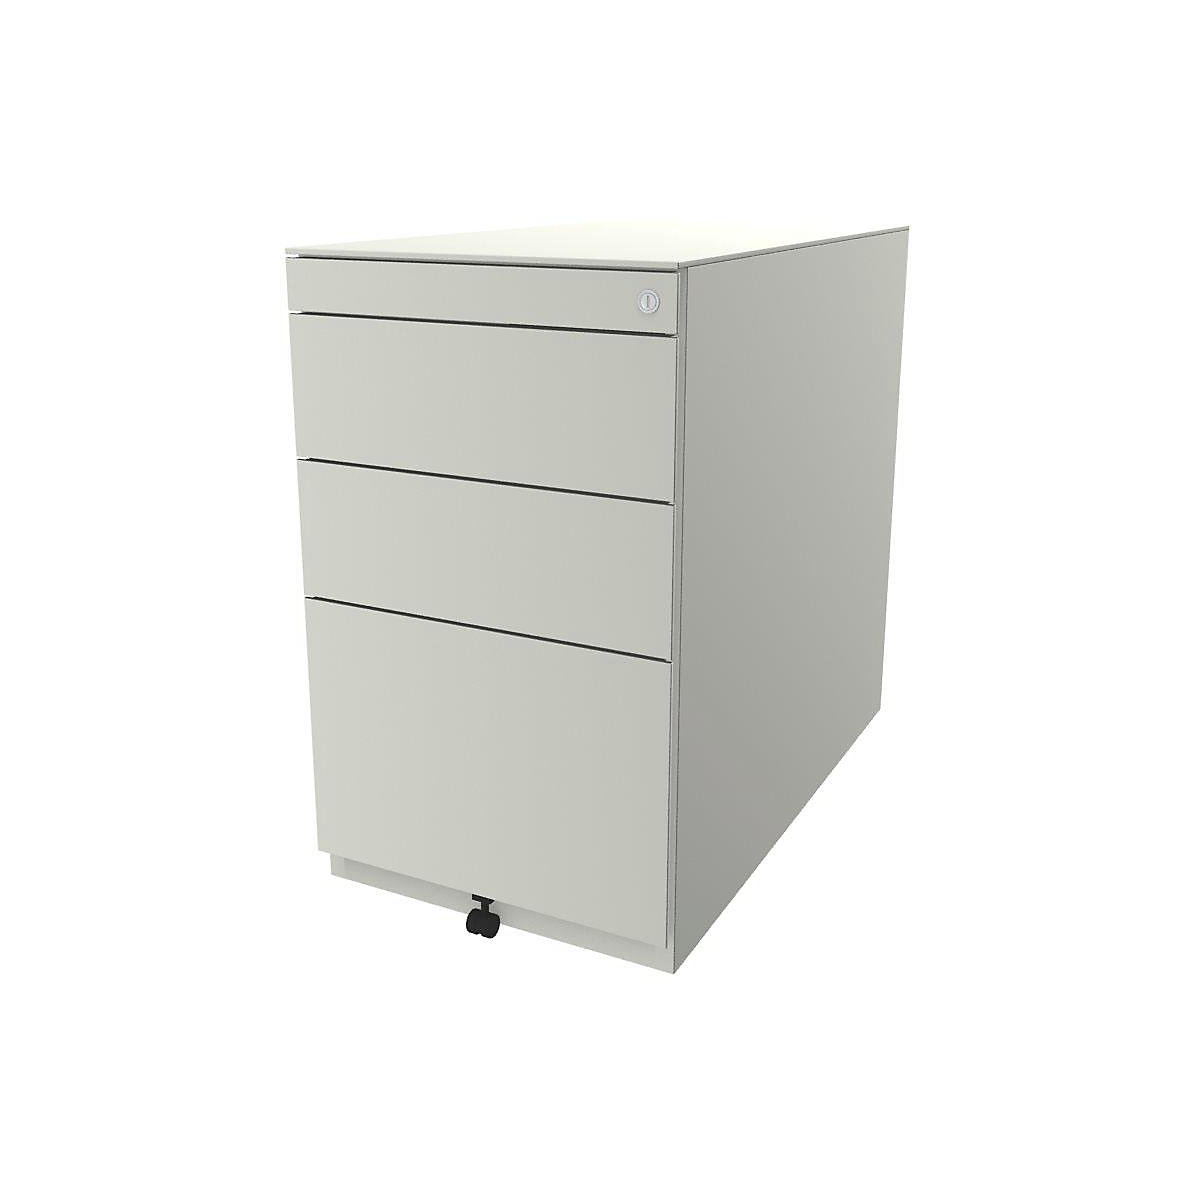 Note™ fixed pedestal, with 2 universal drawers, 1 suspension file drawer – BISLEY, with top, depth 775 mm, pure white-9